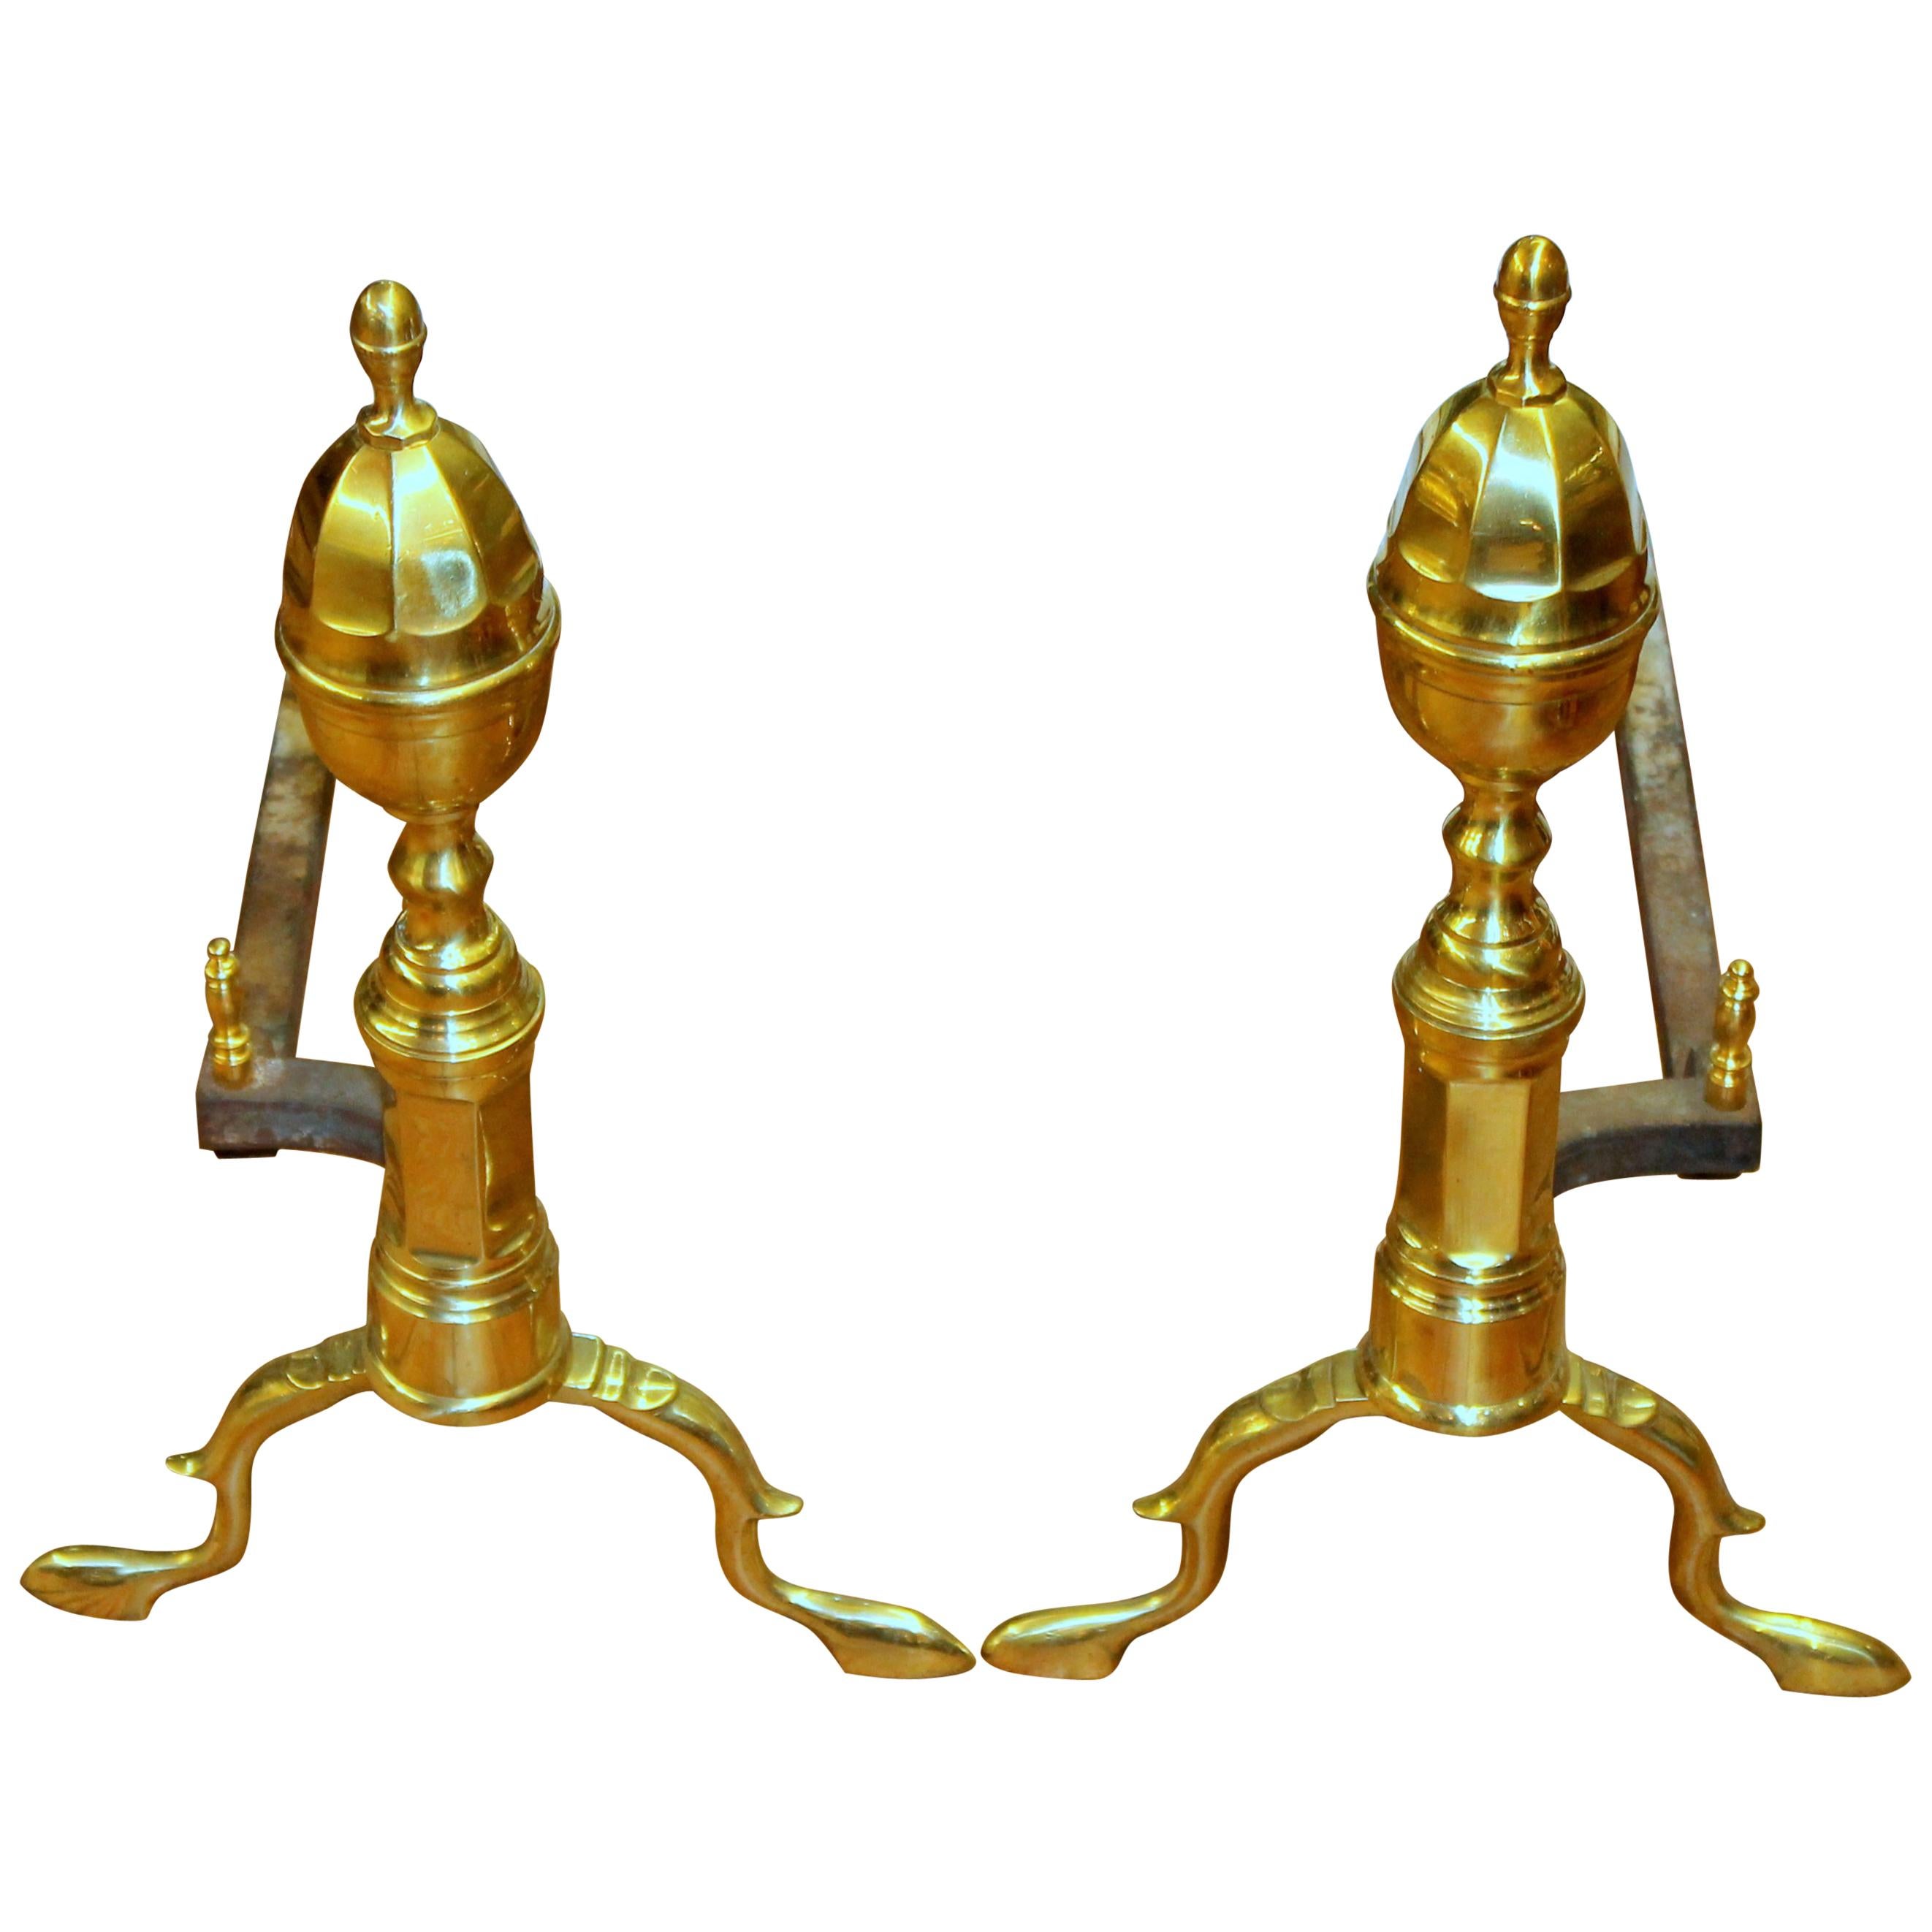 Pair of Old American Federal Style Cast Brass "Lemon-Top" Andirons